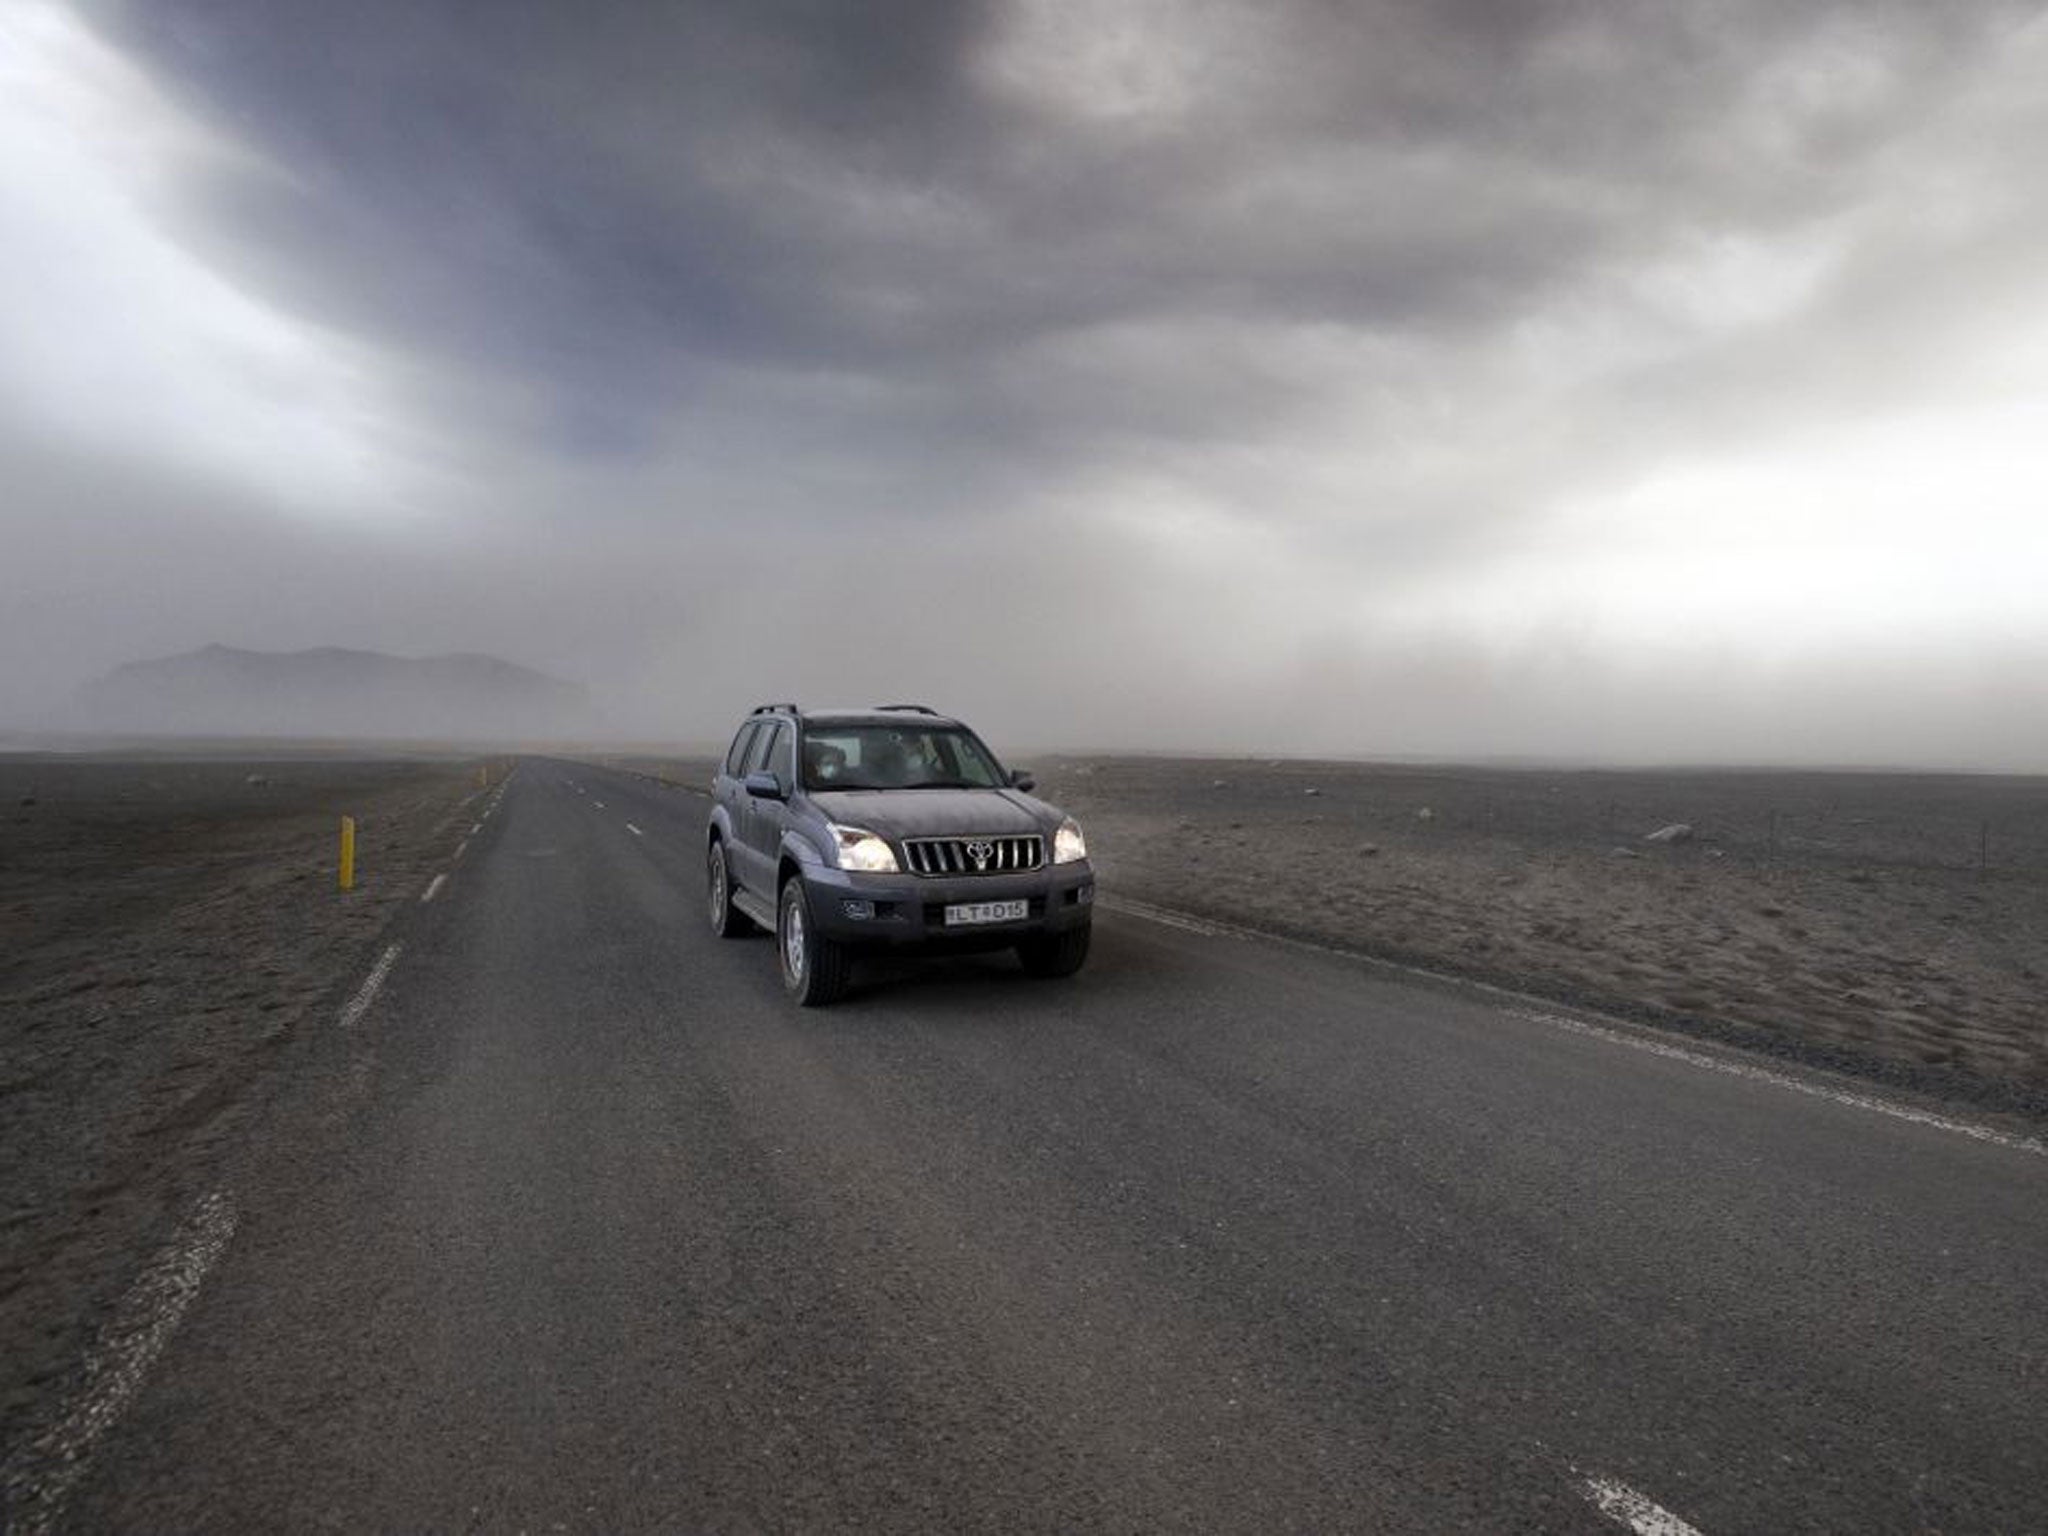 Insurance black spot: a car drives under a volcanic ash cloud in Iceland